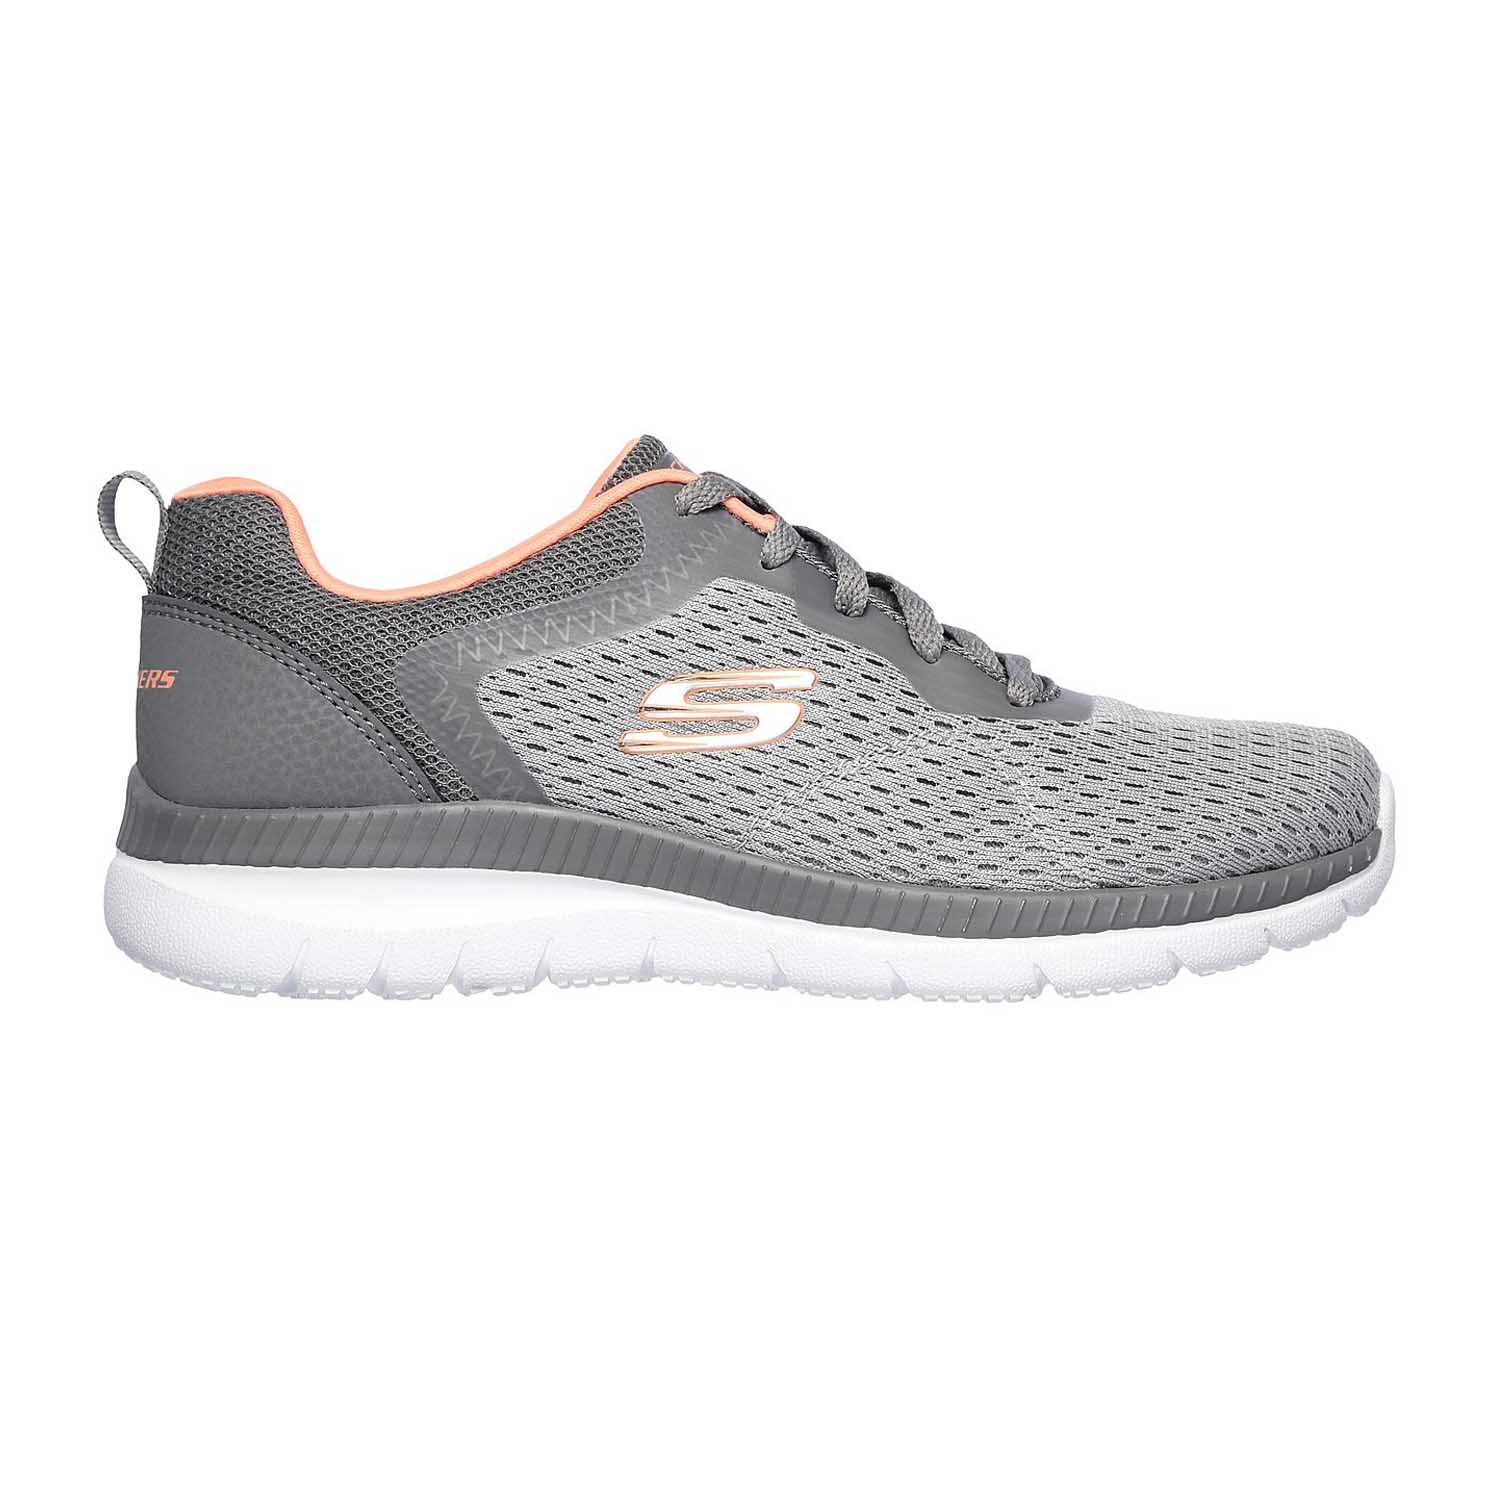 Skechers Engineered Mesh LaceUp W ( 12607-GYCL )